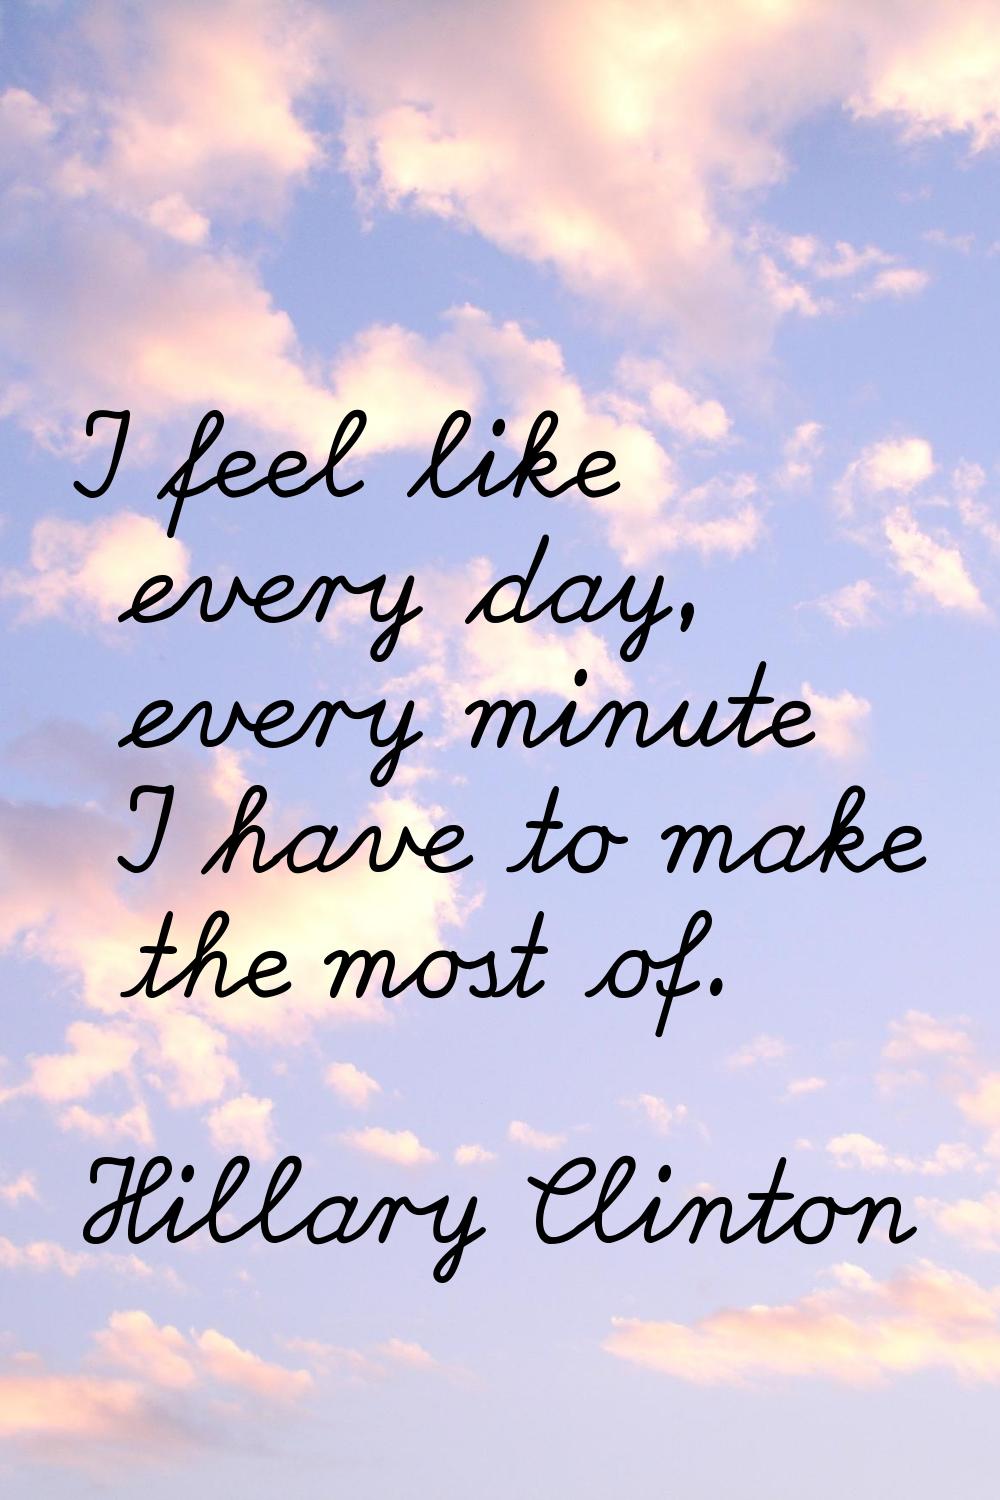 I feel like every day, every minute I have to make the most of.